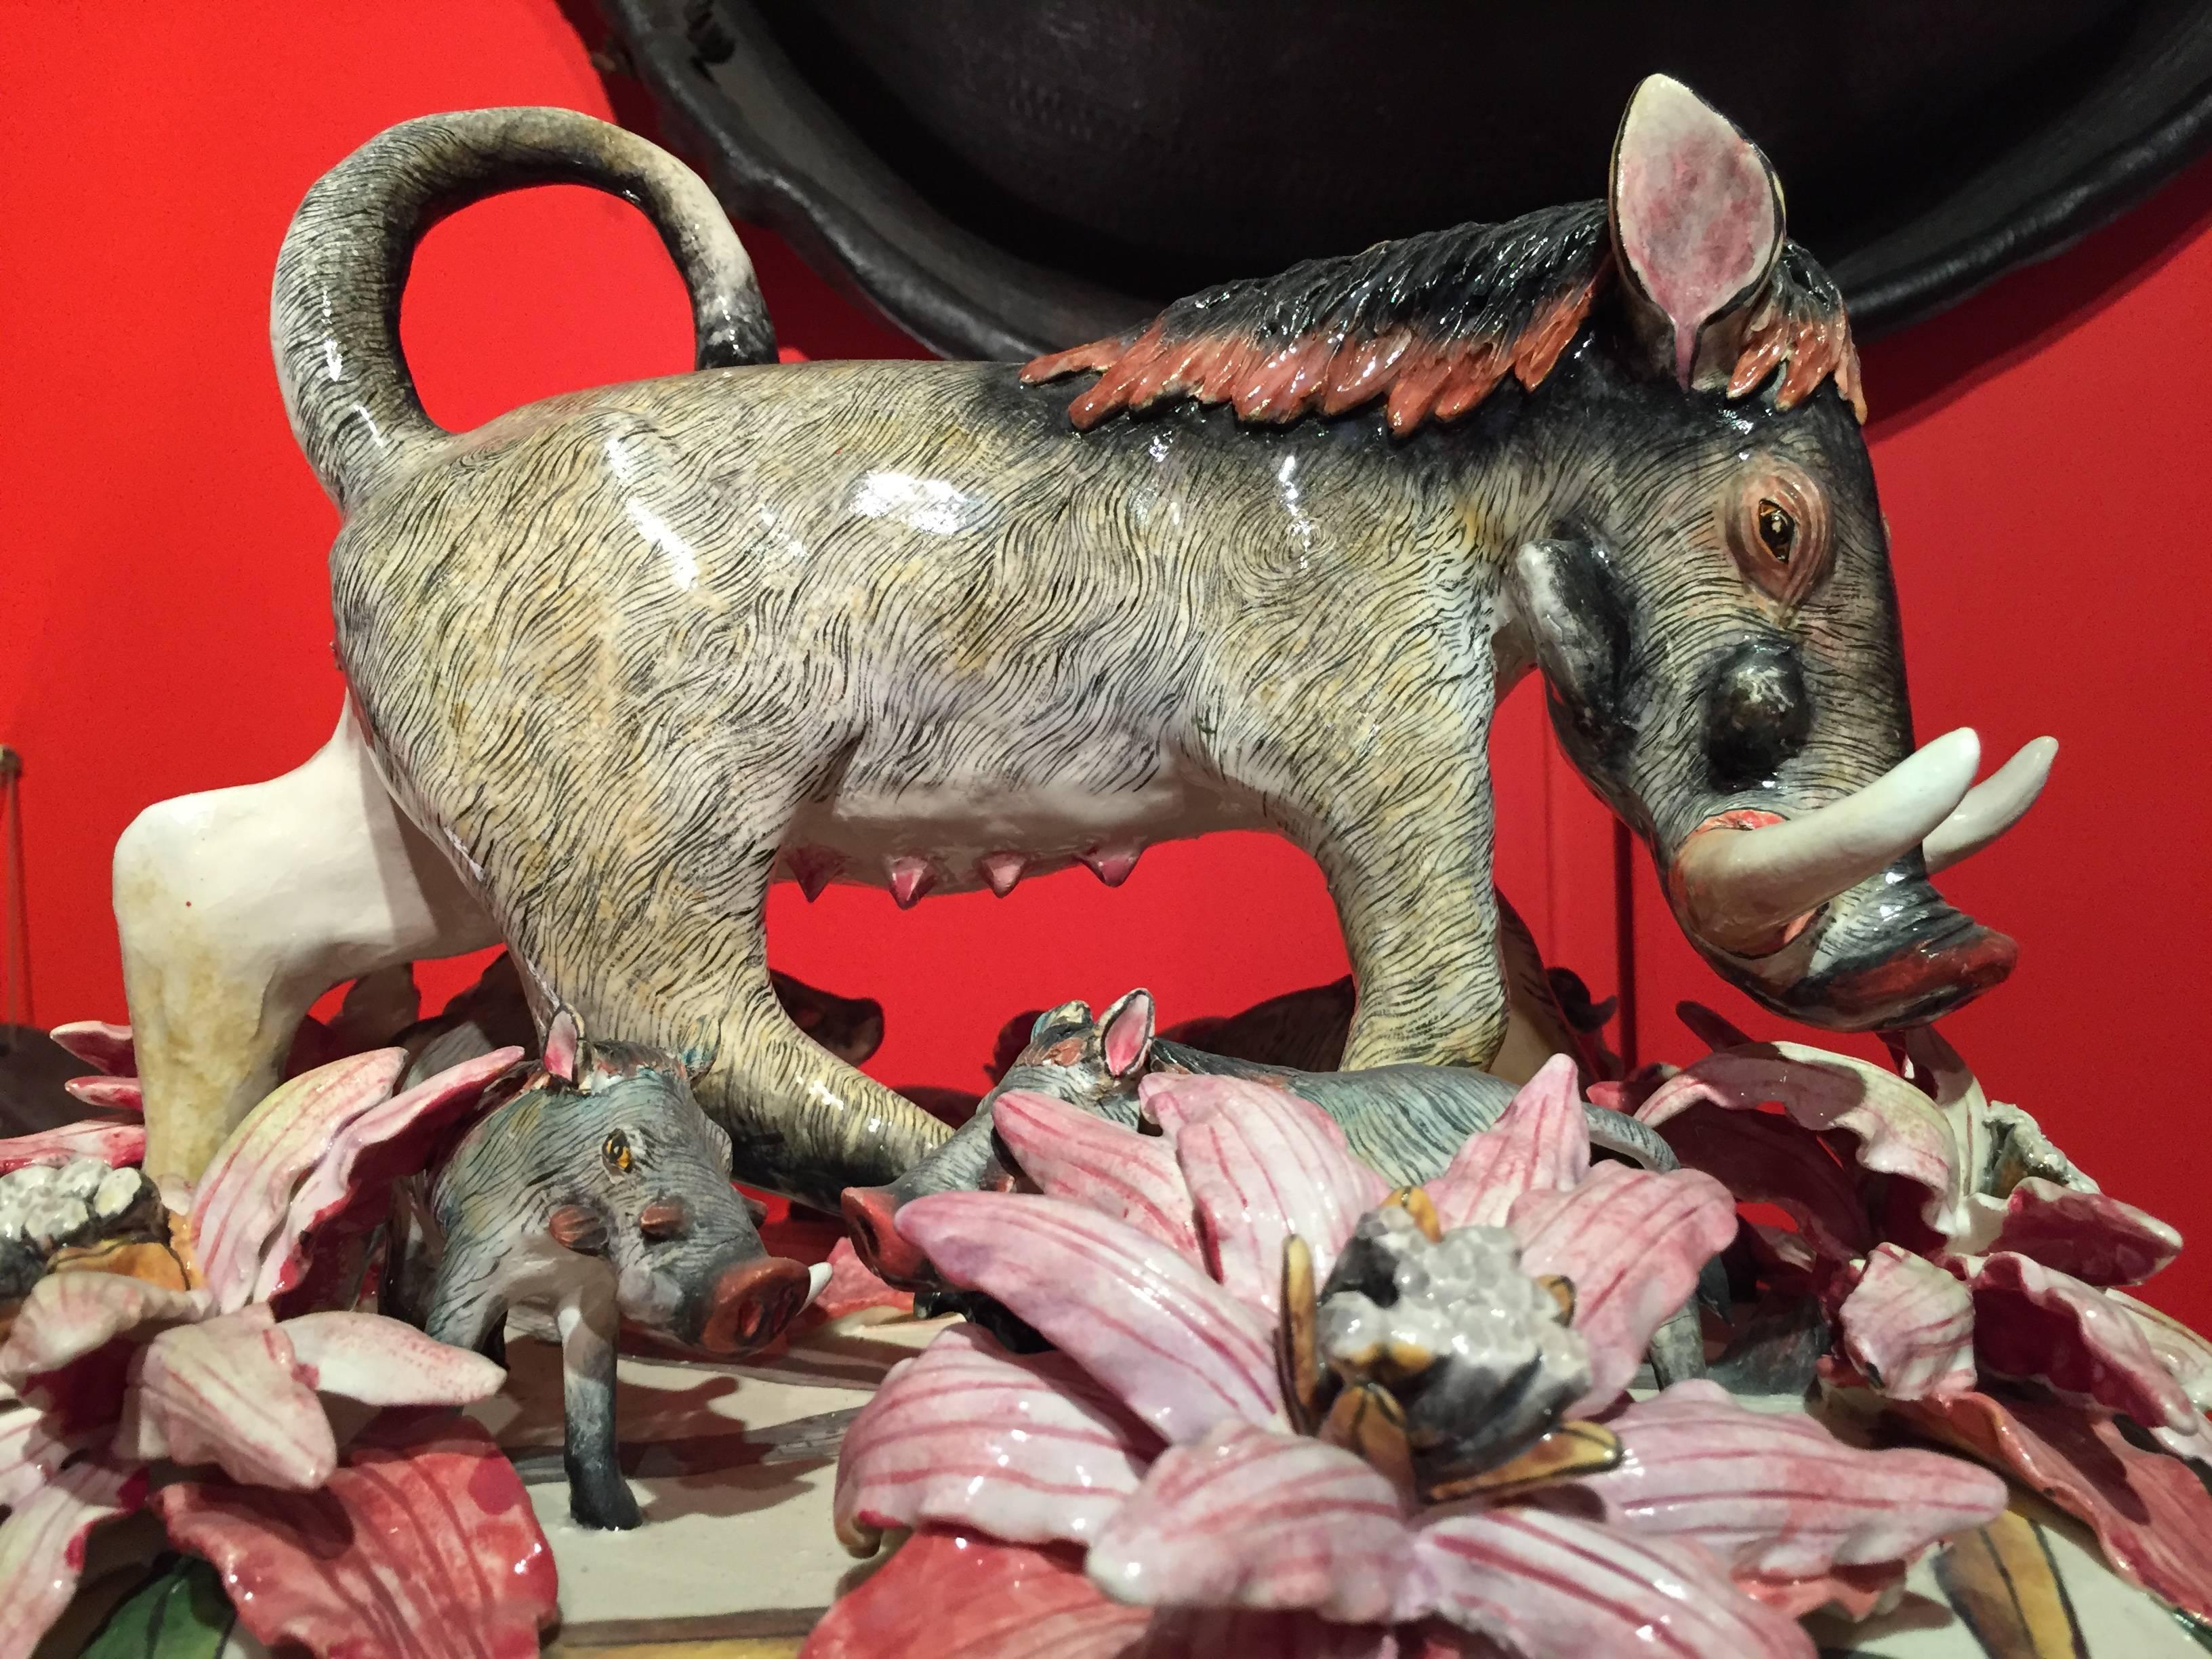 Exceptional sculpture by Ardmore Ceramics of South Africa. This warthog tureen centerpiece was sculpted by George Manyathela and Thabo Mbhele and painted by Elvis Mkhize.

Ardmore ceramic art was established by Fée Halsted and is situated in the